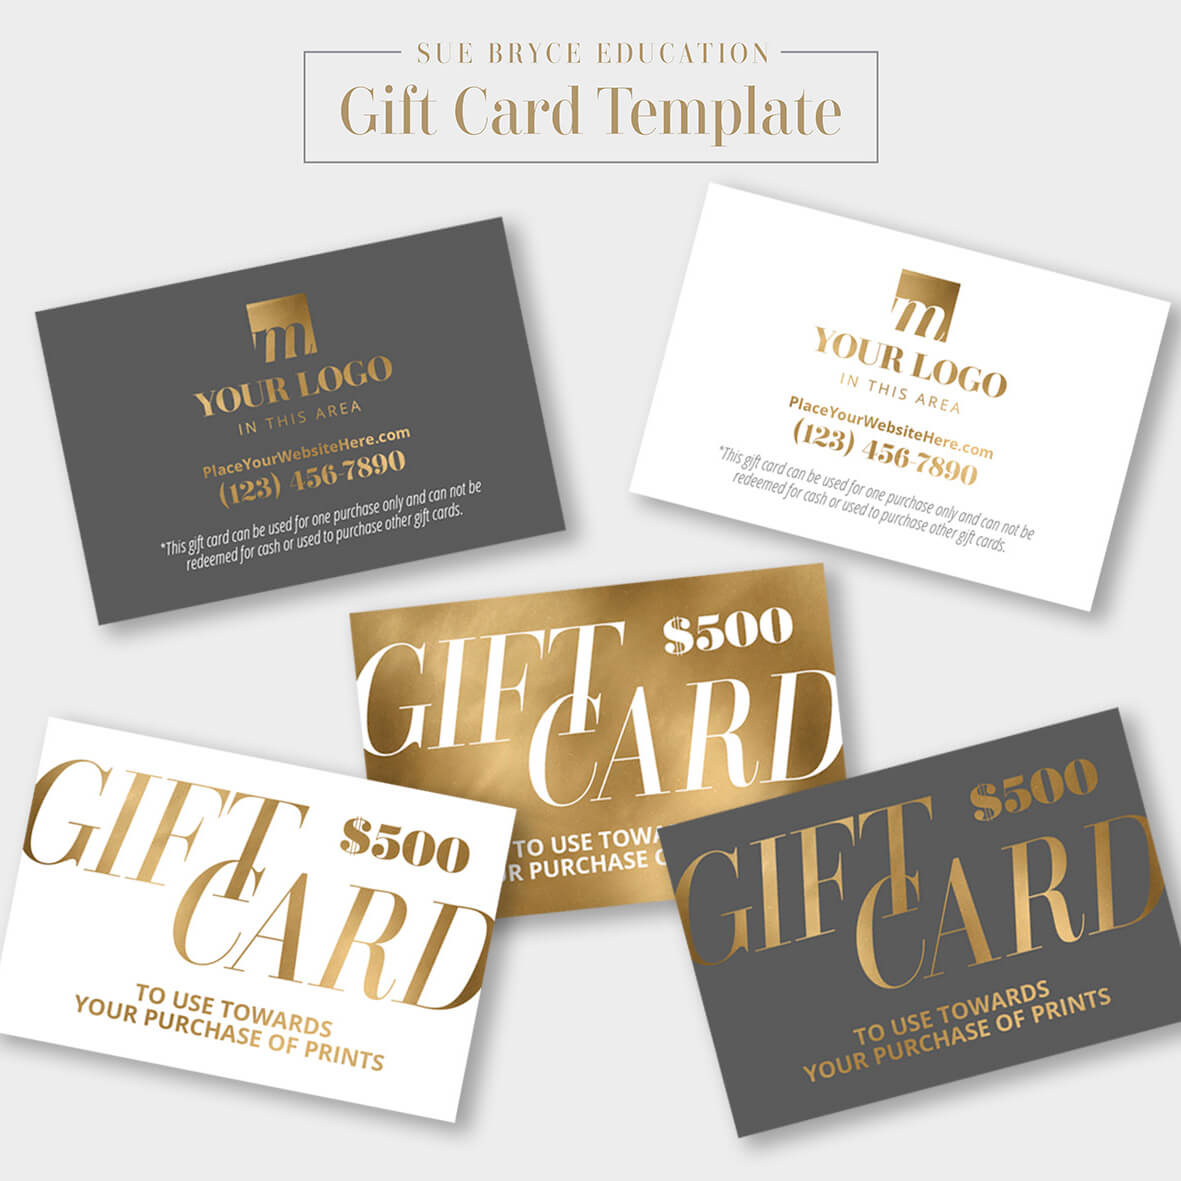 Gift Certificate Templates Indesign Illustrator Gift Coupon In Indesign Gift Certificate Template